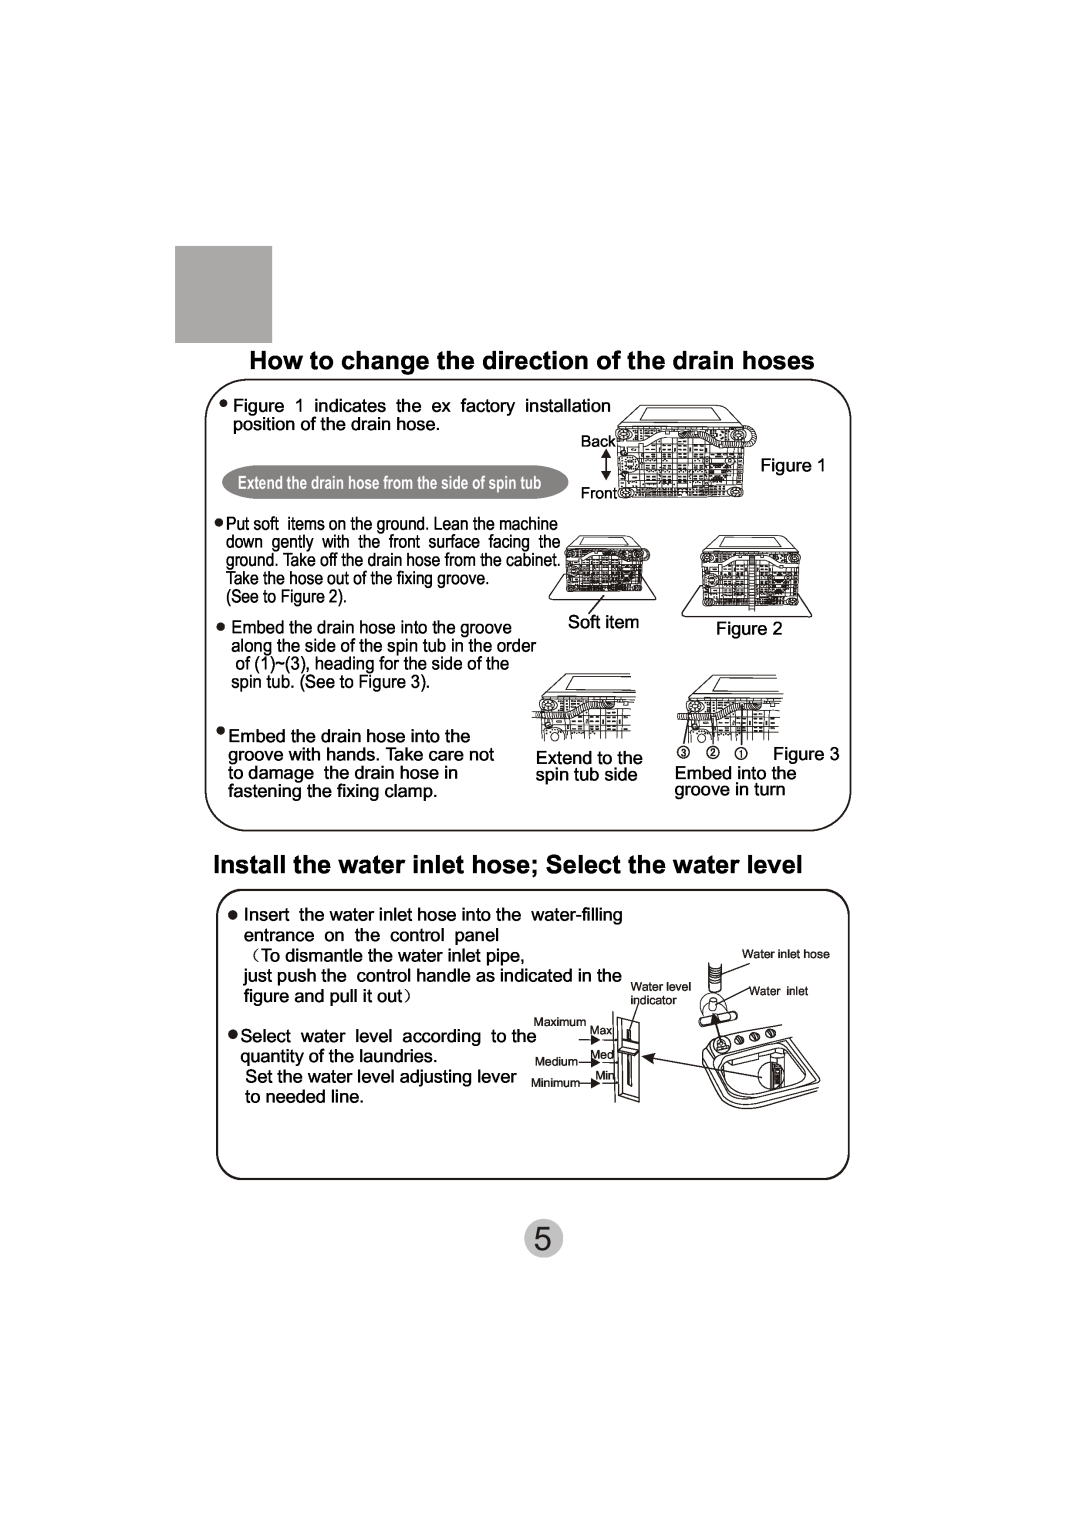 Haier XPB135-LA How to change the direction of the drain hoses, Install the water inlet hose Select the water level 